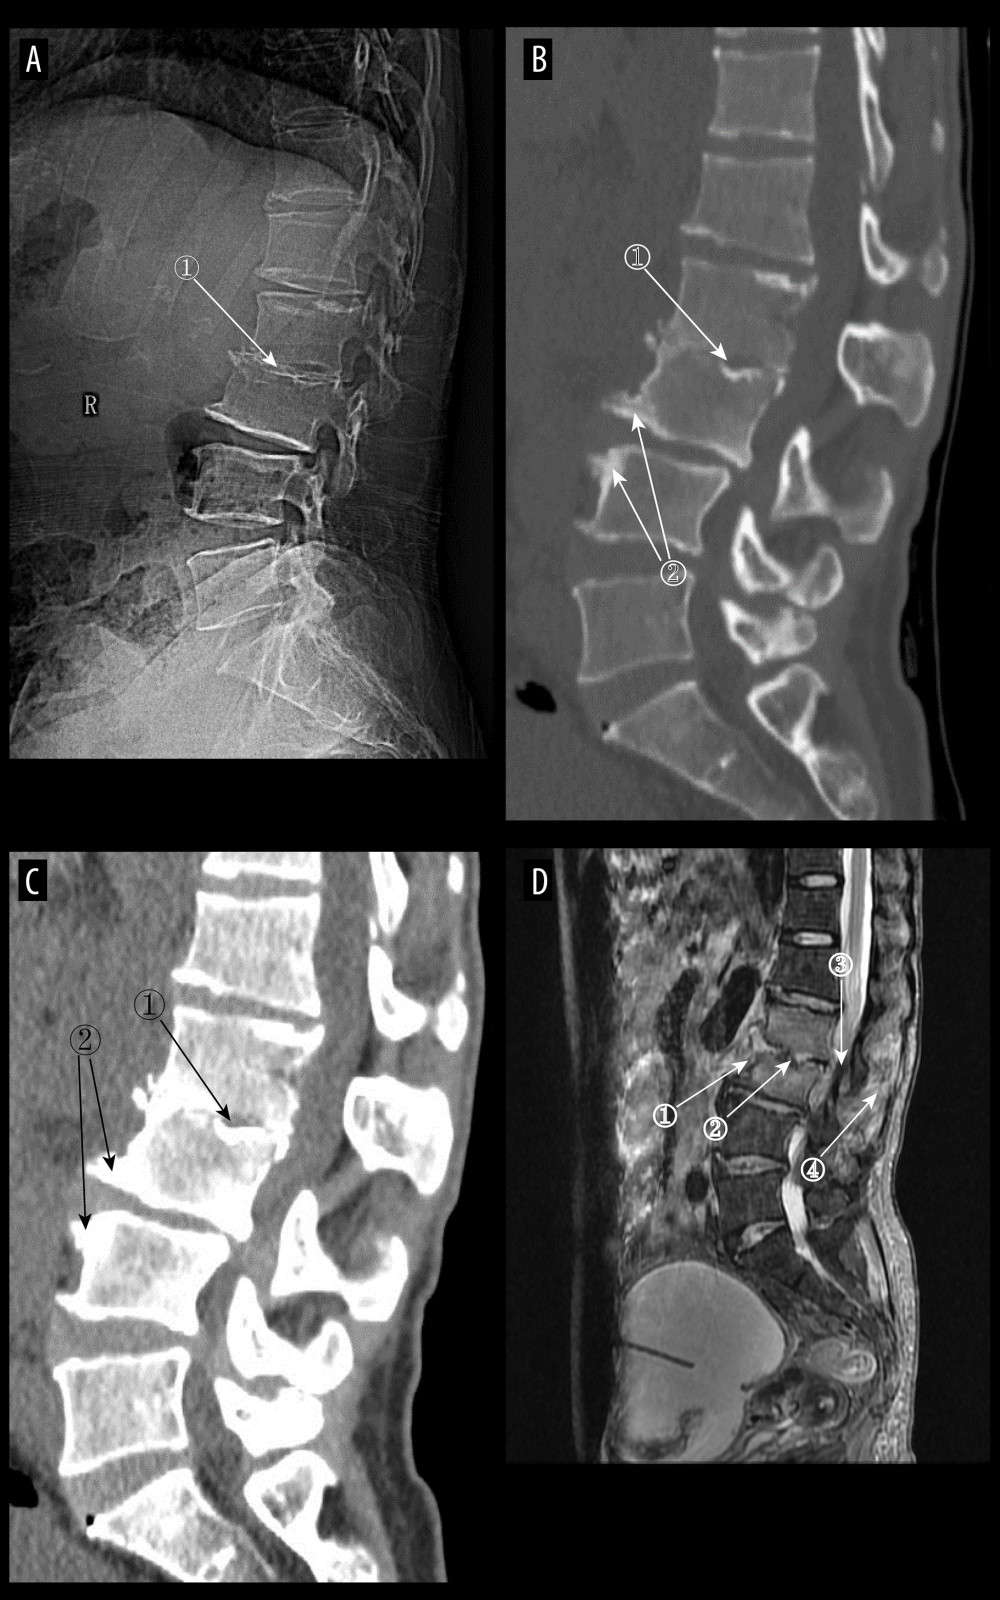 (A) Plain radiographs of late pyogenic spondylitis (PS). Marker 1 shows severe narrowing of the L2–3 intervertebral space, with bony hyperplasia and sharpening of the vertebral margins. (A–D) Images of the same patient, with 42 days between onset of symptoms and the time of the radiograph. (B, C) Plain and enhanced computed tomography in late-stage PS. Marker 1 shows marked narrowing of the L2–3 intervertebral space, and marker 2 shows rough and blurred edges of the L3–L4 vertebral body with osteolytic changes. (D) Magnetic resonance imaging of late PS. Osteolysis of the anterior margin of L3 is shown at marker 1, severe narrowing of the L2–3 intervertebral space is shown at marker 2, osteophytes of the small joints are shown at marker 3, and high signal of the lumbar attachments is shown at marker 4 (Adobe Illustrator 2022. 26.5. Adobe Inc.).